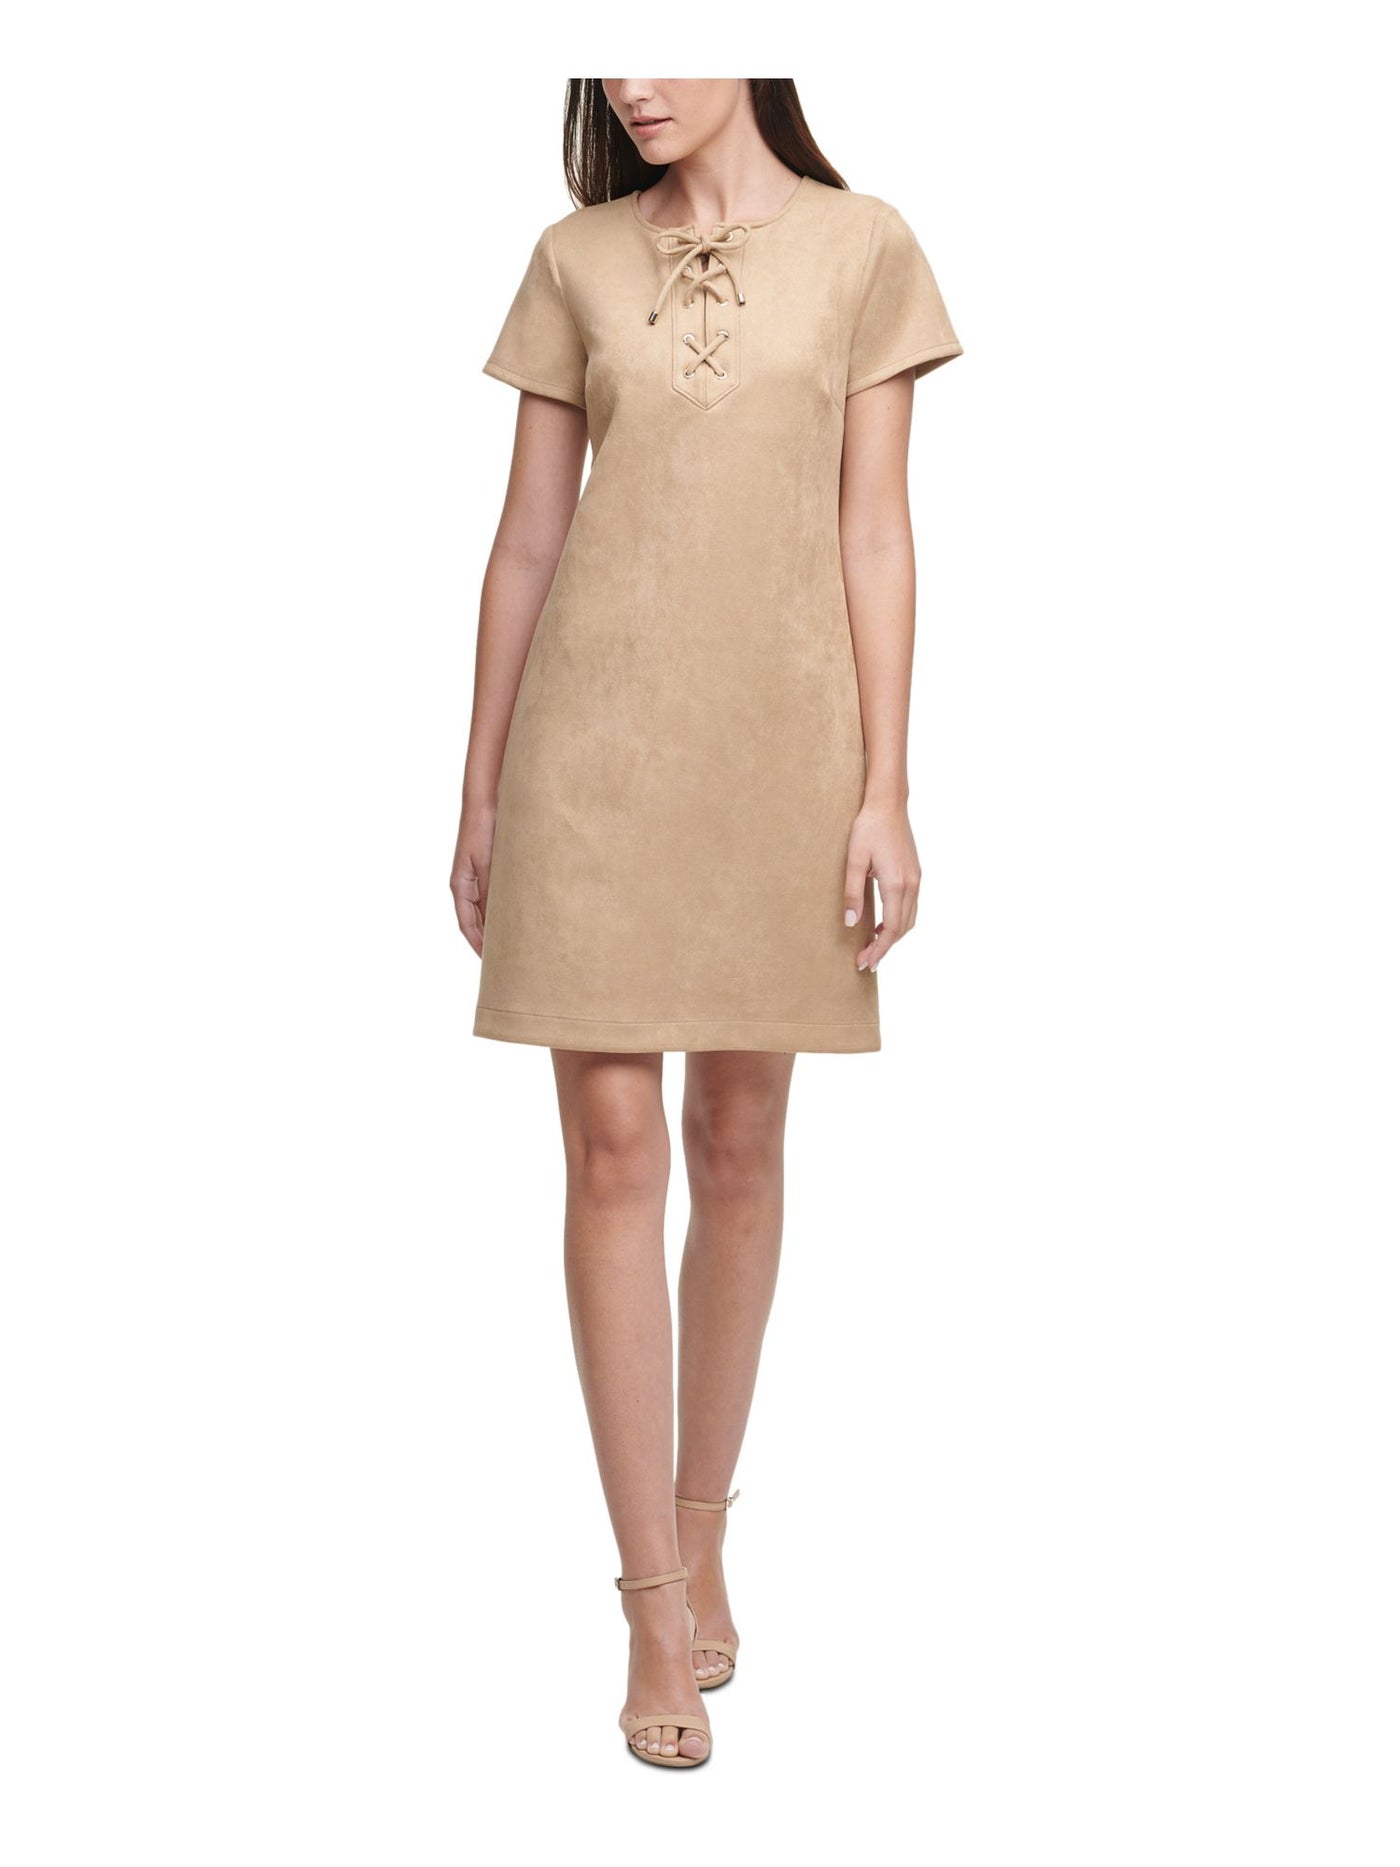 TOMMY HILFIGER Womens Beige Faux Suede Short Sleeve Jewel Neck Above The Knee Shift Dress 6